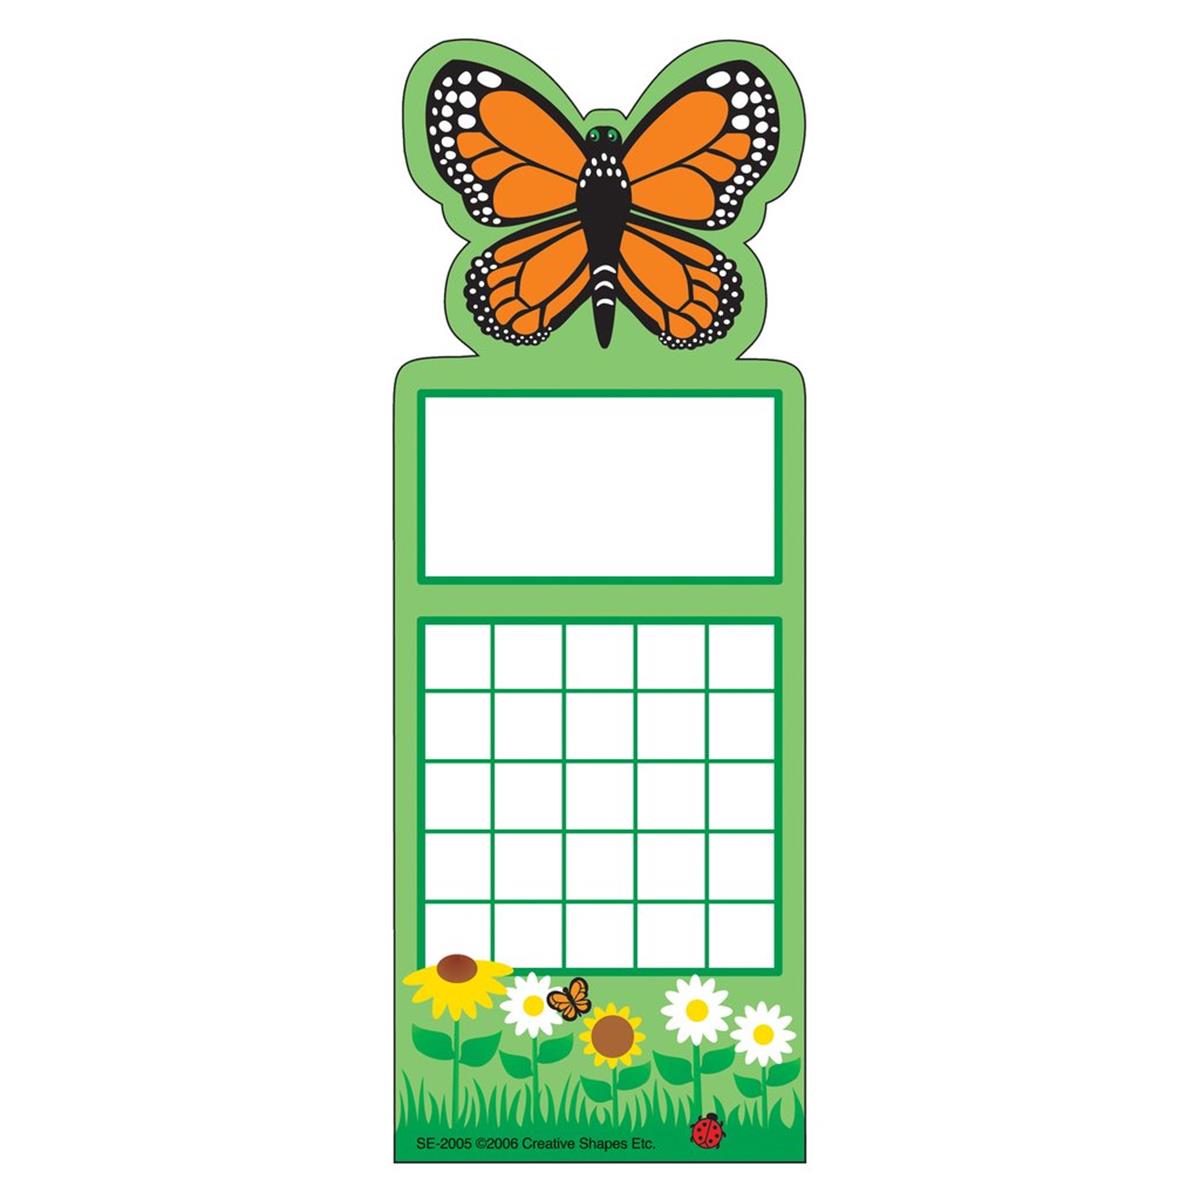 Picture of Creative Shapes Etc SE-2005 3 x 9 in. Personal Incentive Chart&#44; Butterfly - 24 Sheets per Pack